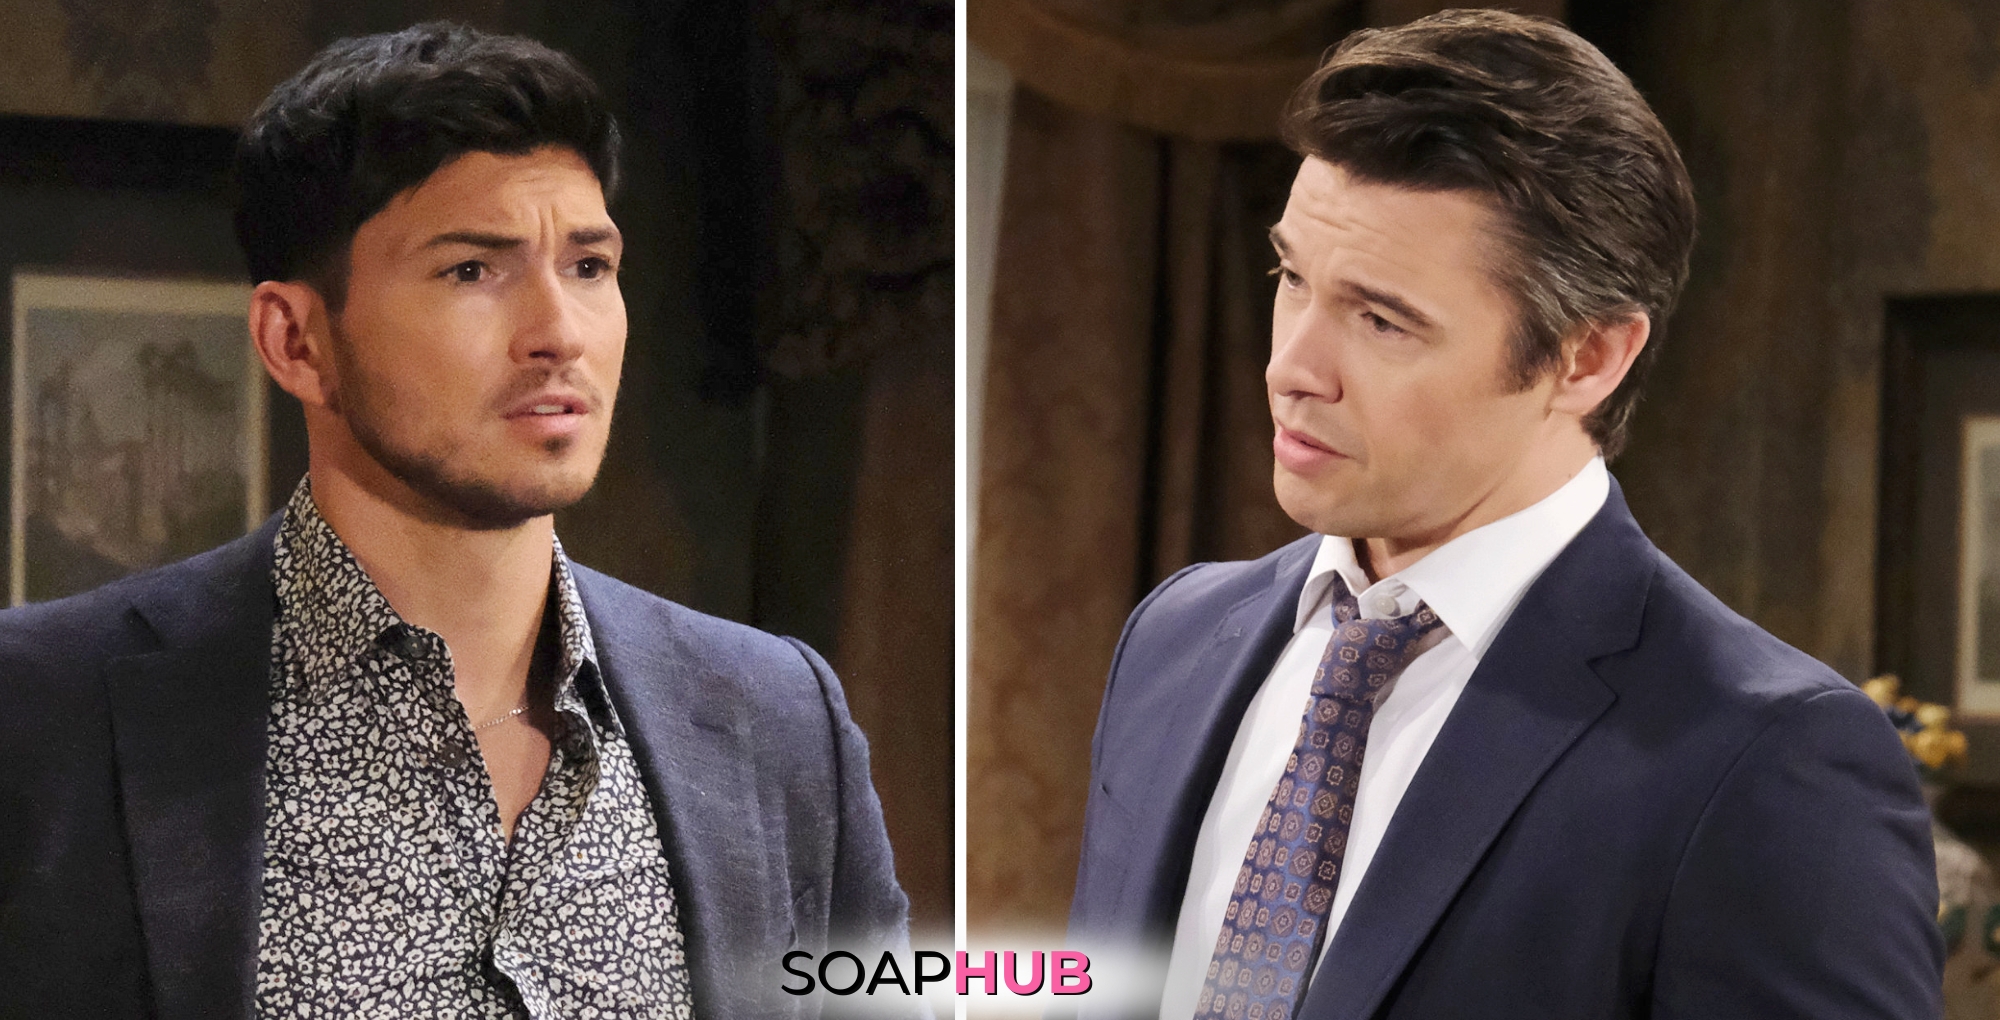 Days of our Lives spoilers feature Alex and Xander with the Soap Hub logo.